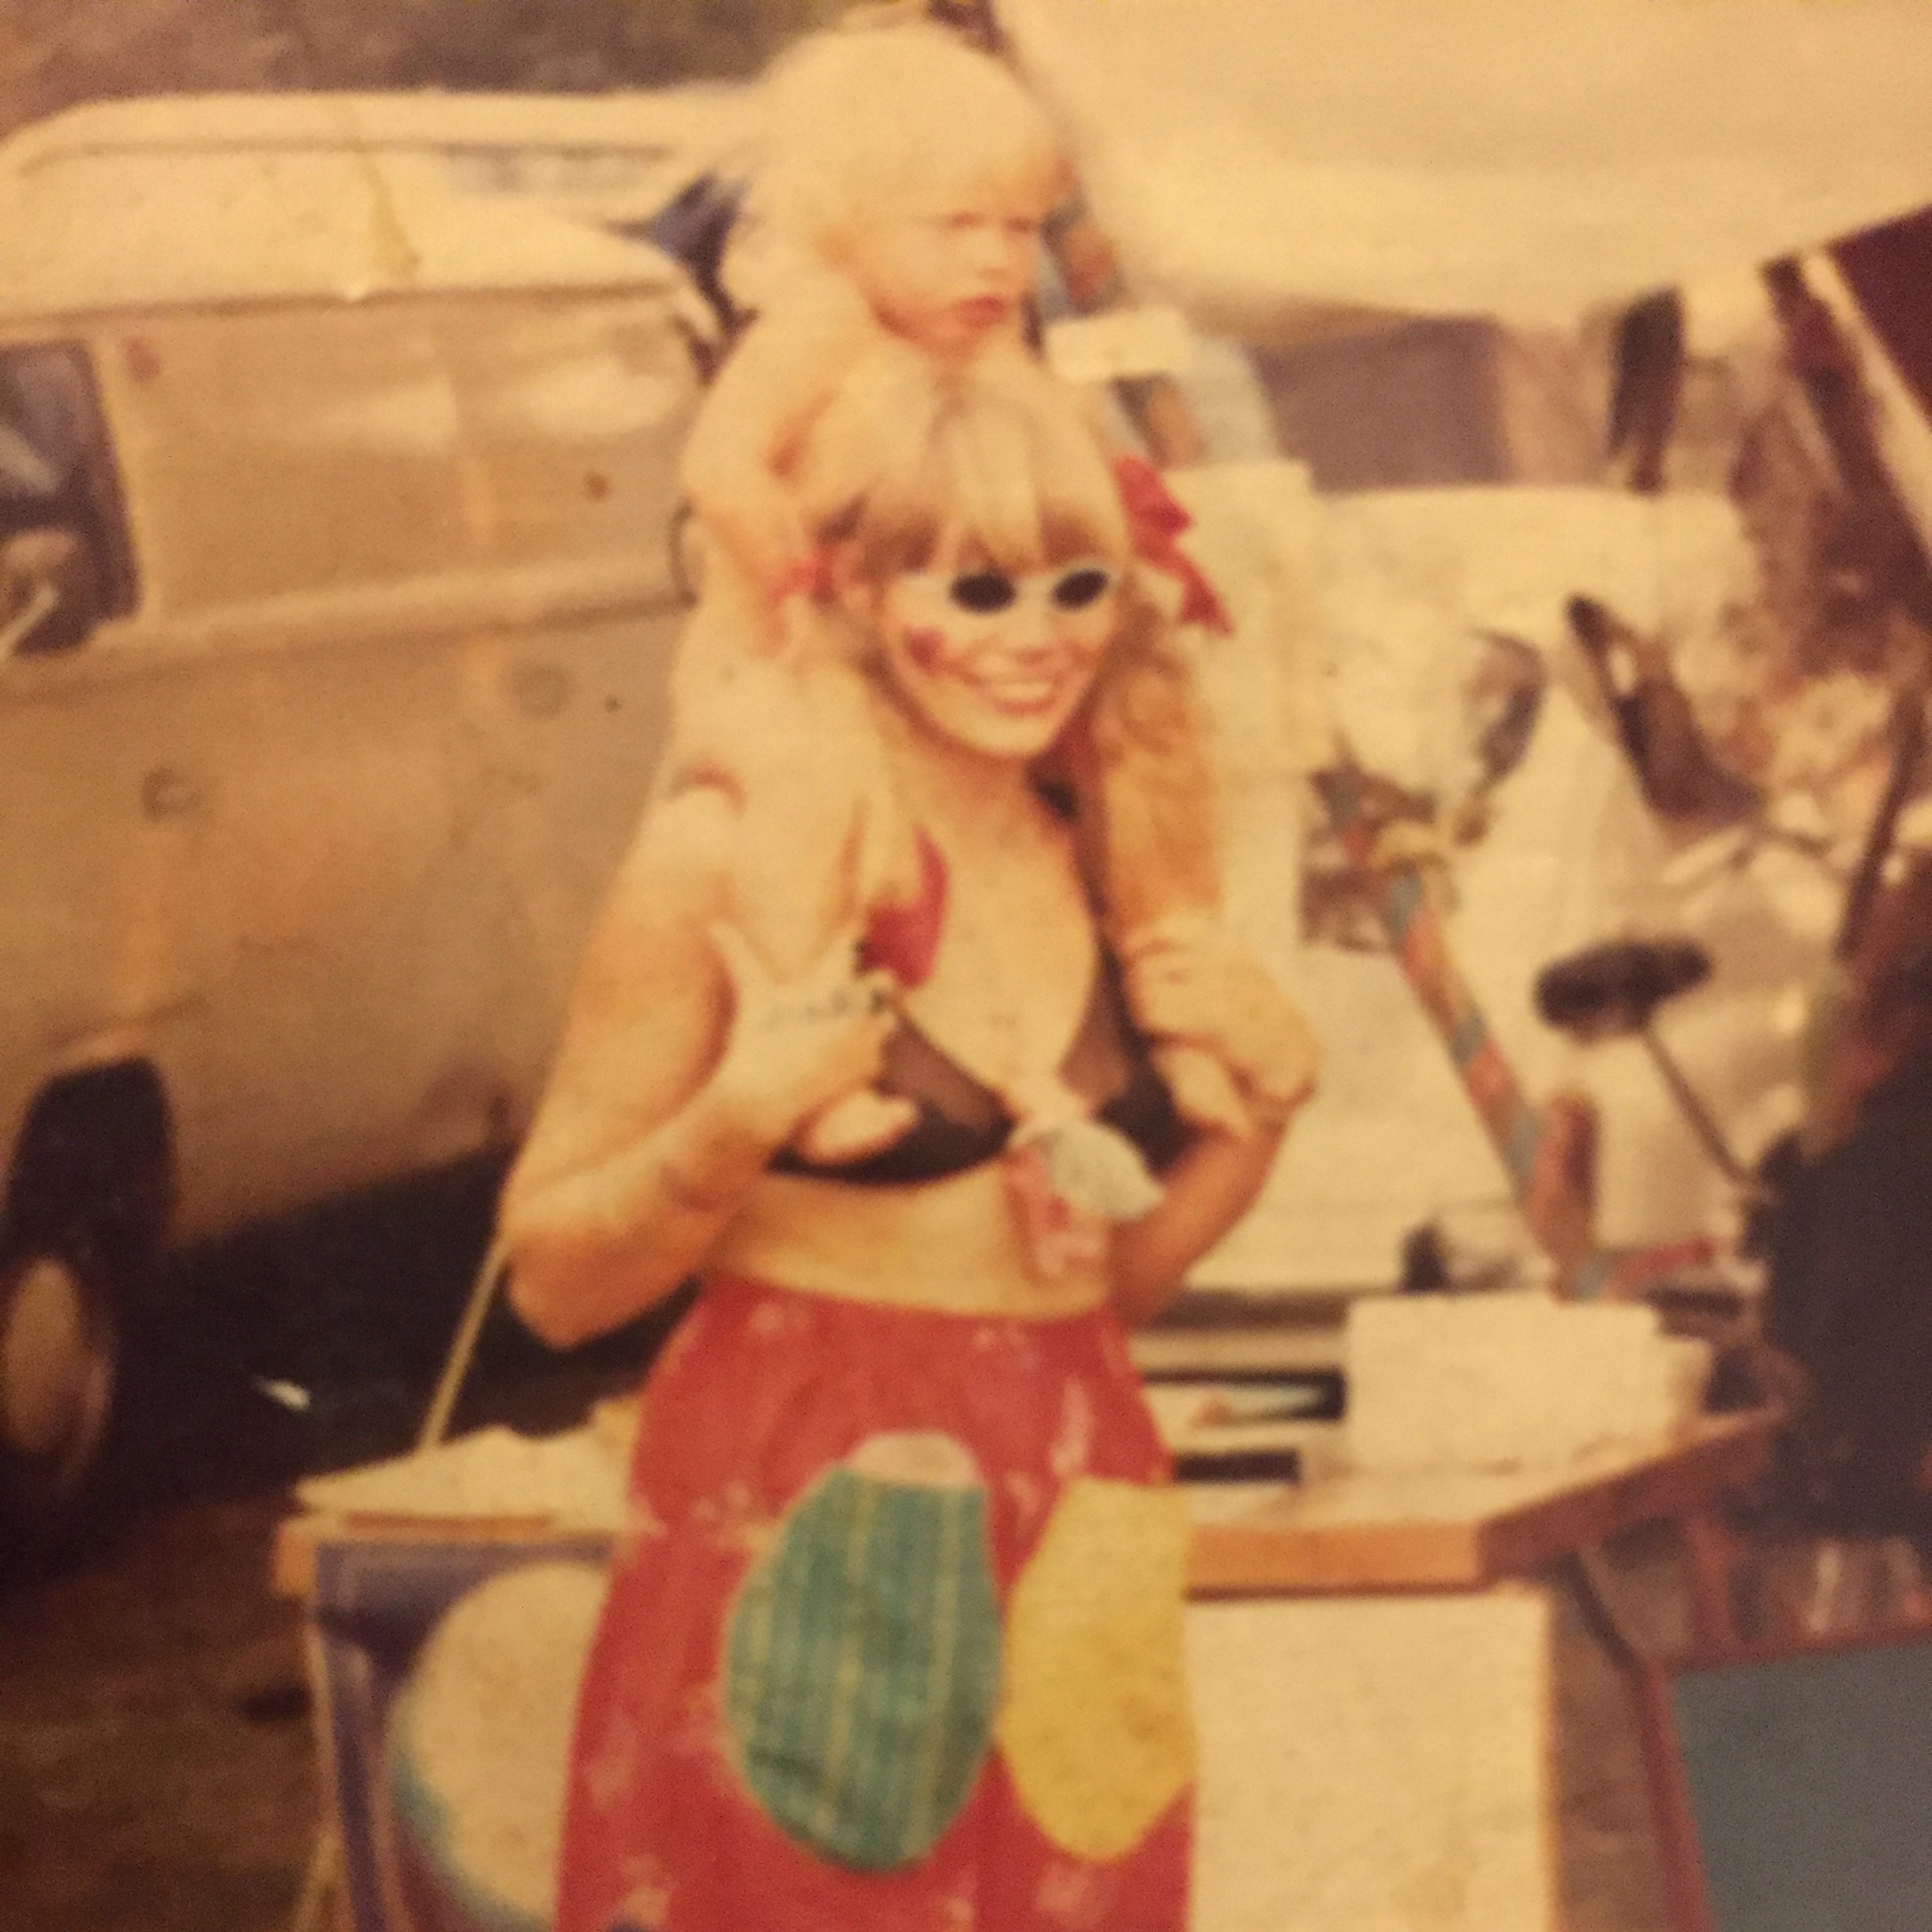 My mum was a real life Hippie. 

Before it was cool and bohemian.

We lived in a red bus &amp; travelled Europe, spending time in Portugal &amp; France when I was small. 

Back then an alternative lifestyle was frowned upon and we were seen as the lo